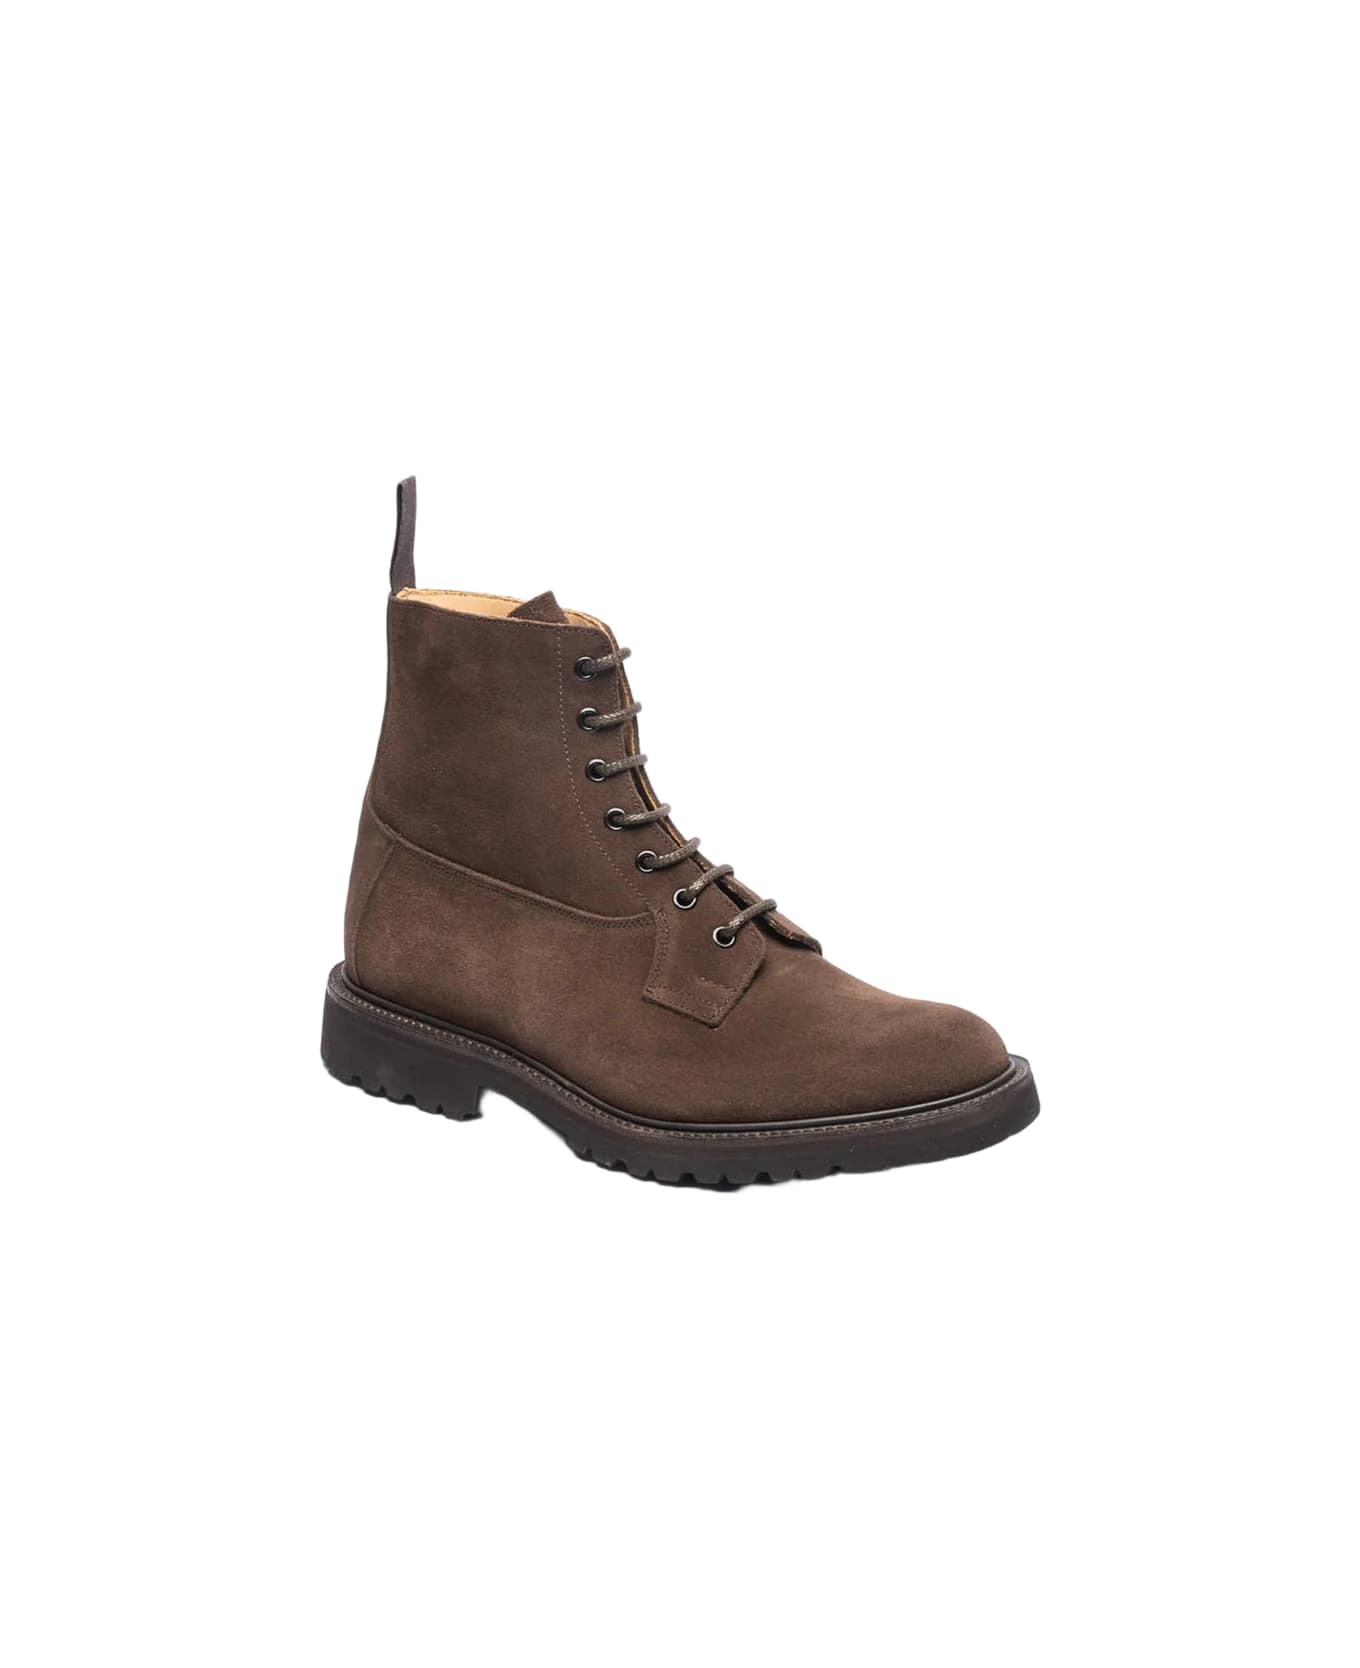 Tricker's Burford Brown Suede Lace-up Boot Vibram Sole - Marrone